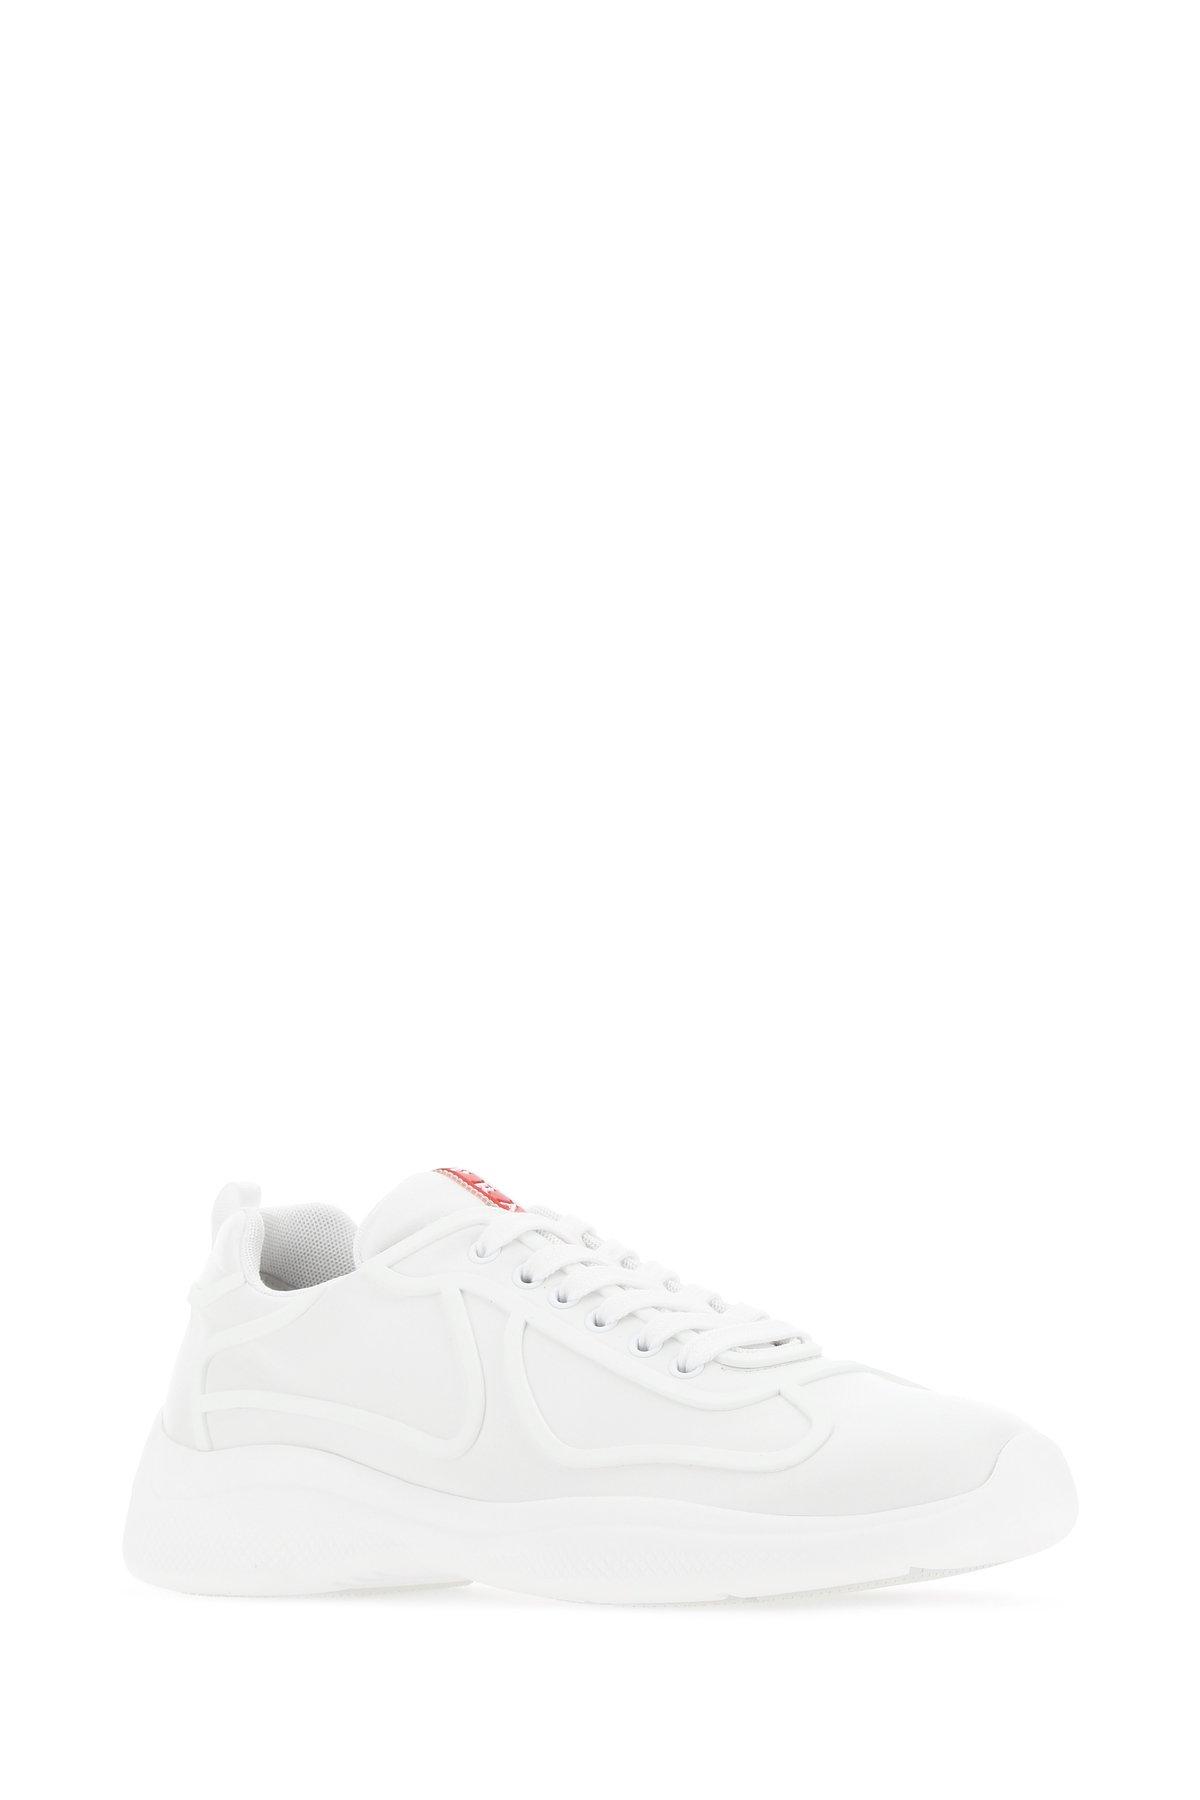 Prada Leather America's Cup Sneakers in White for Men - Lyst